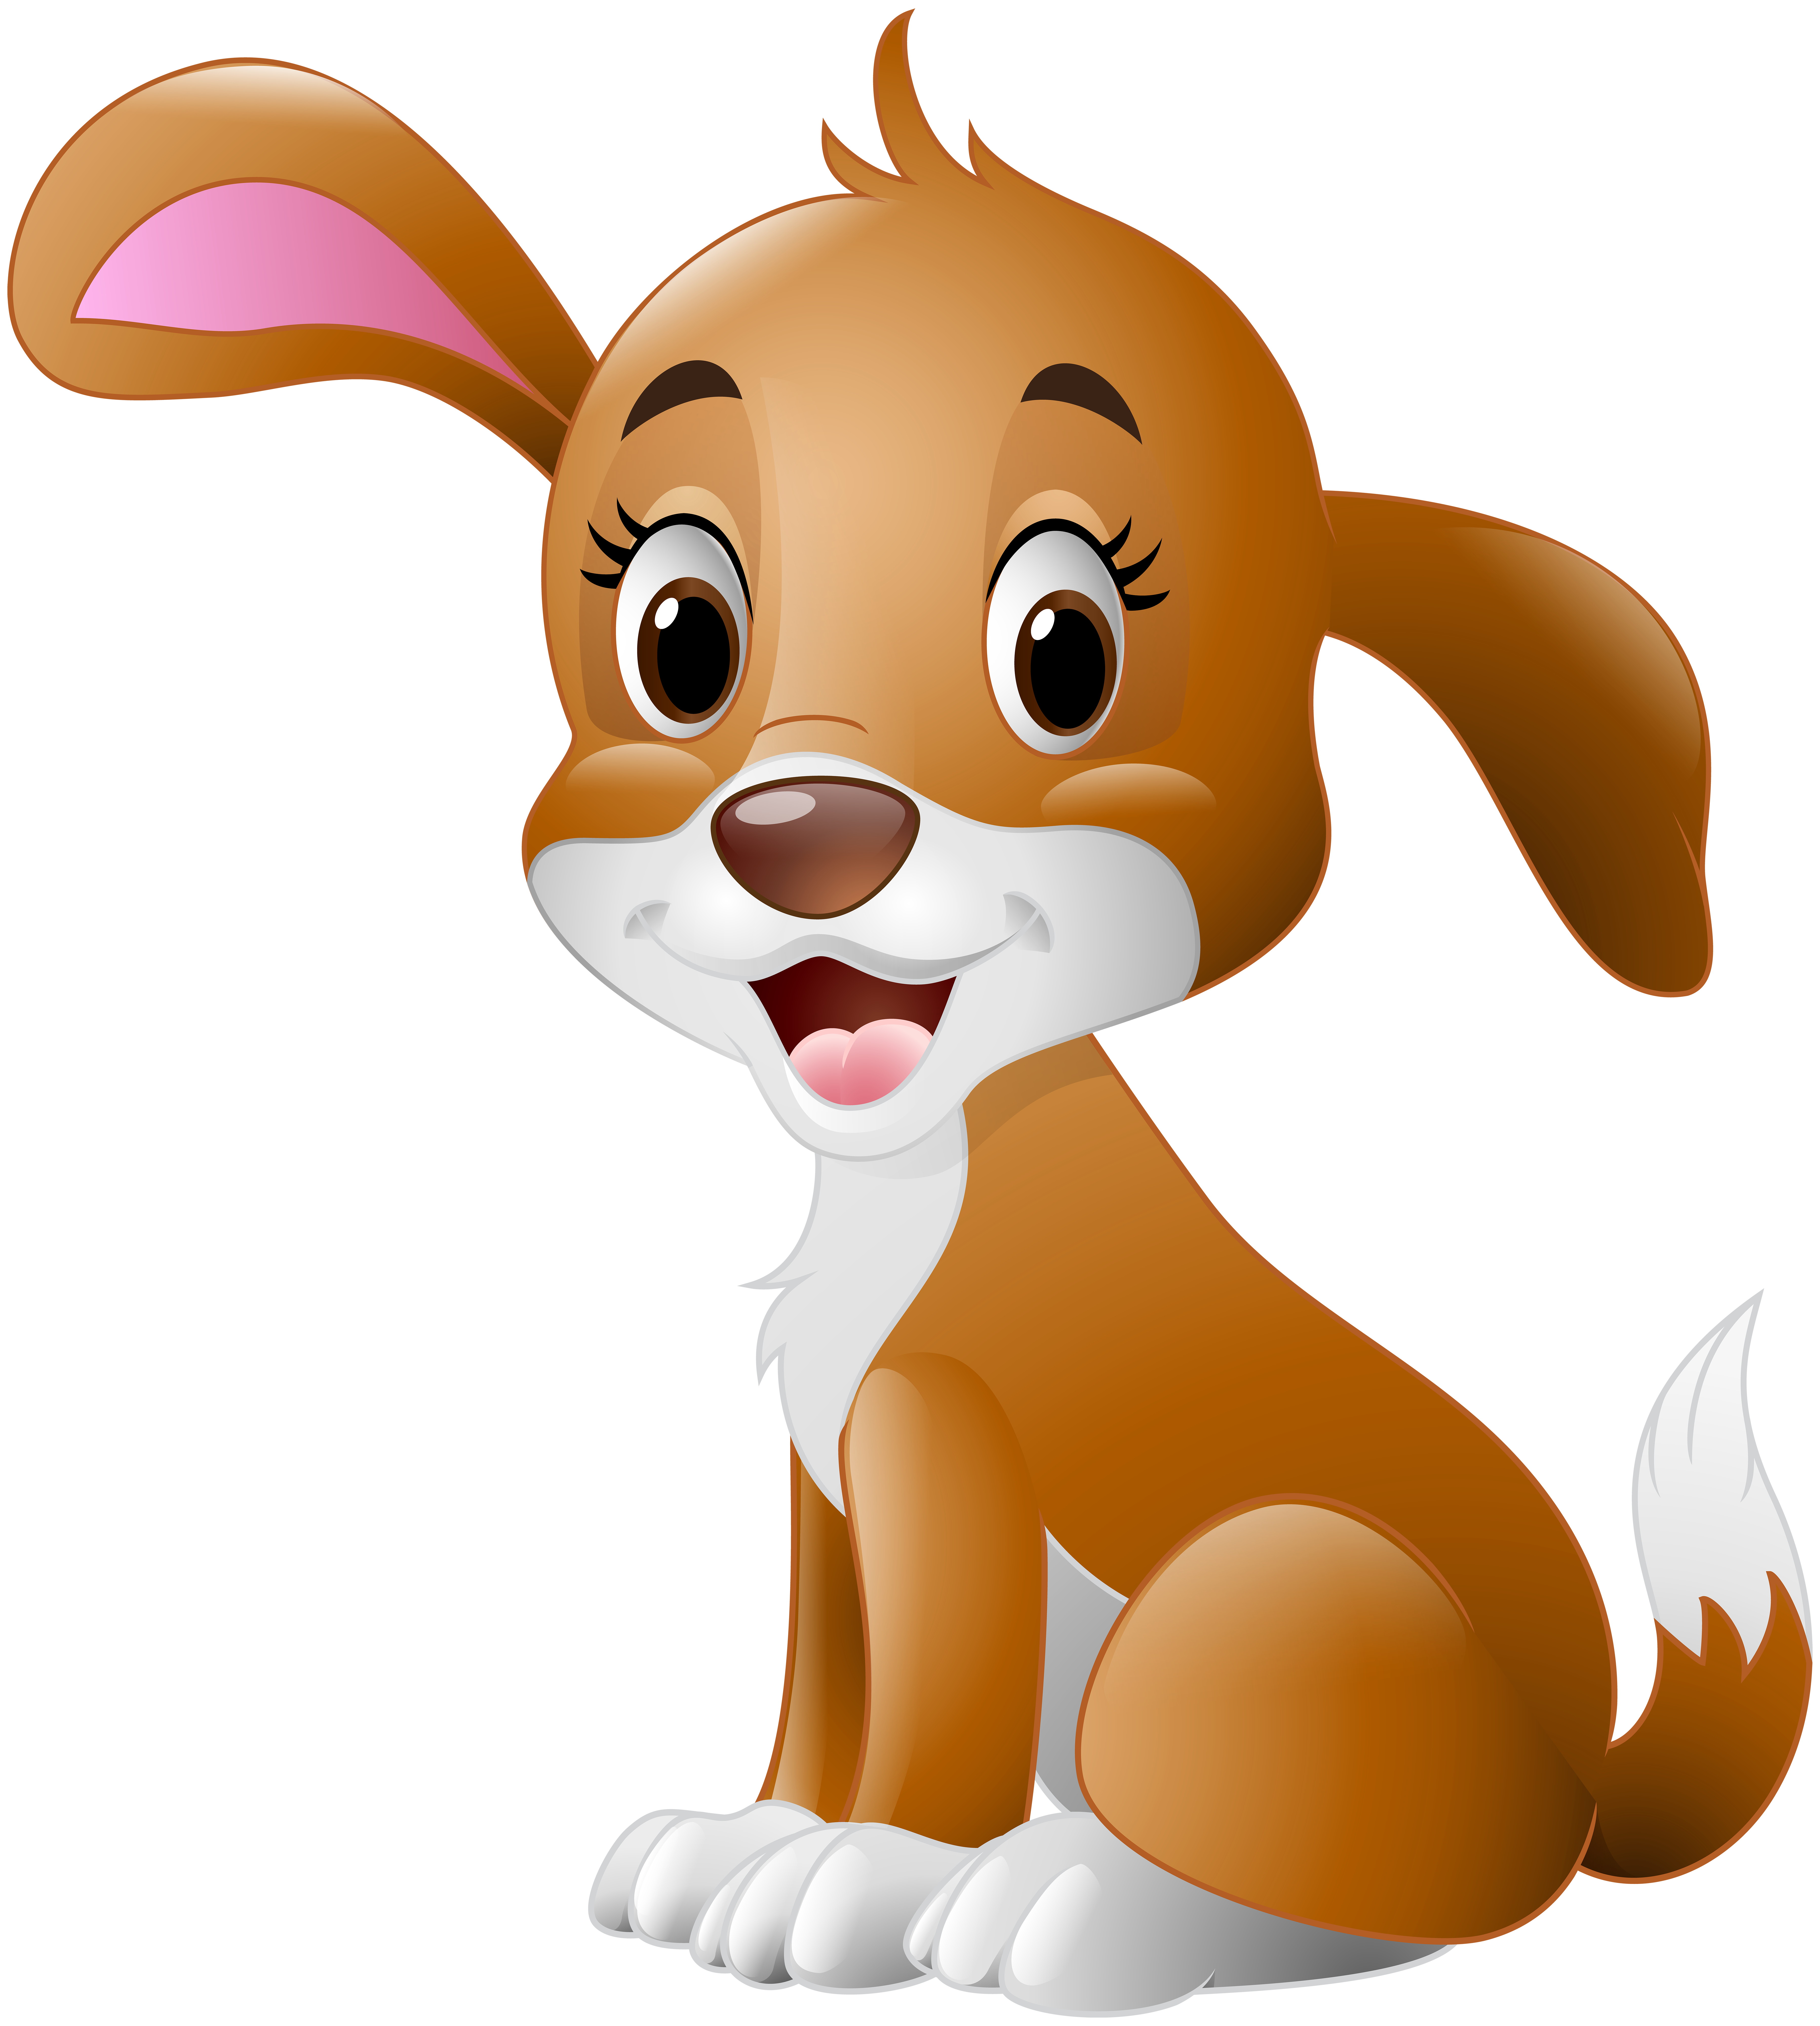 Cute Dog Cartoon PNG Clip Art Image | Gallery Yopriceville - High